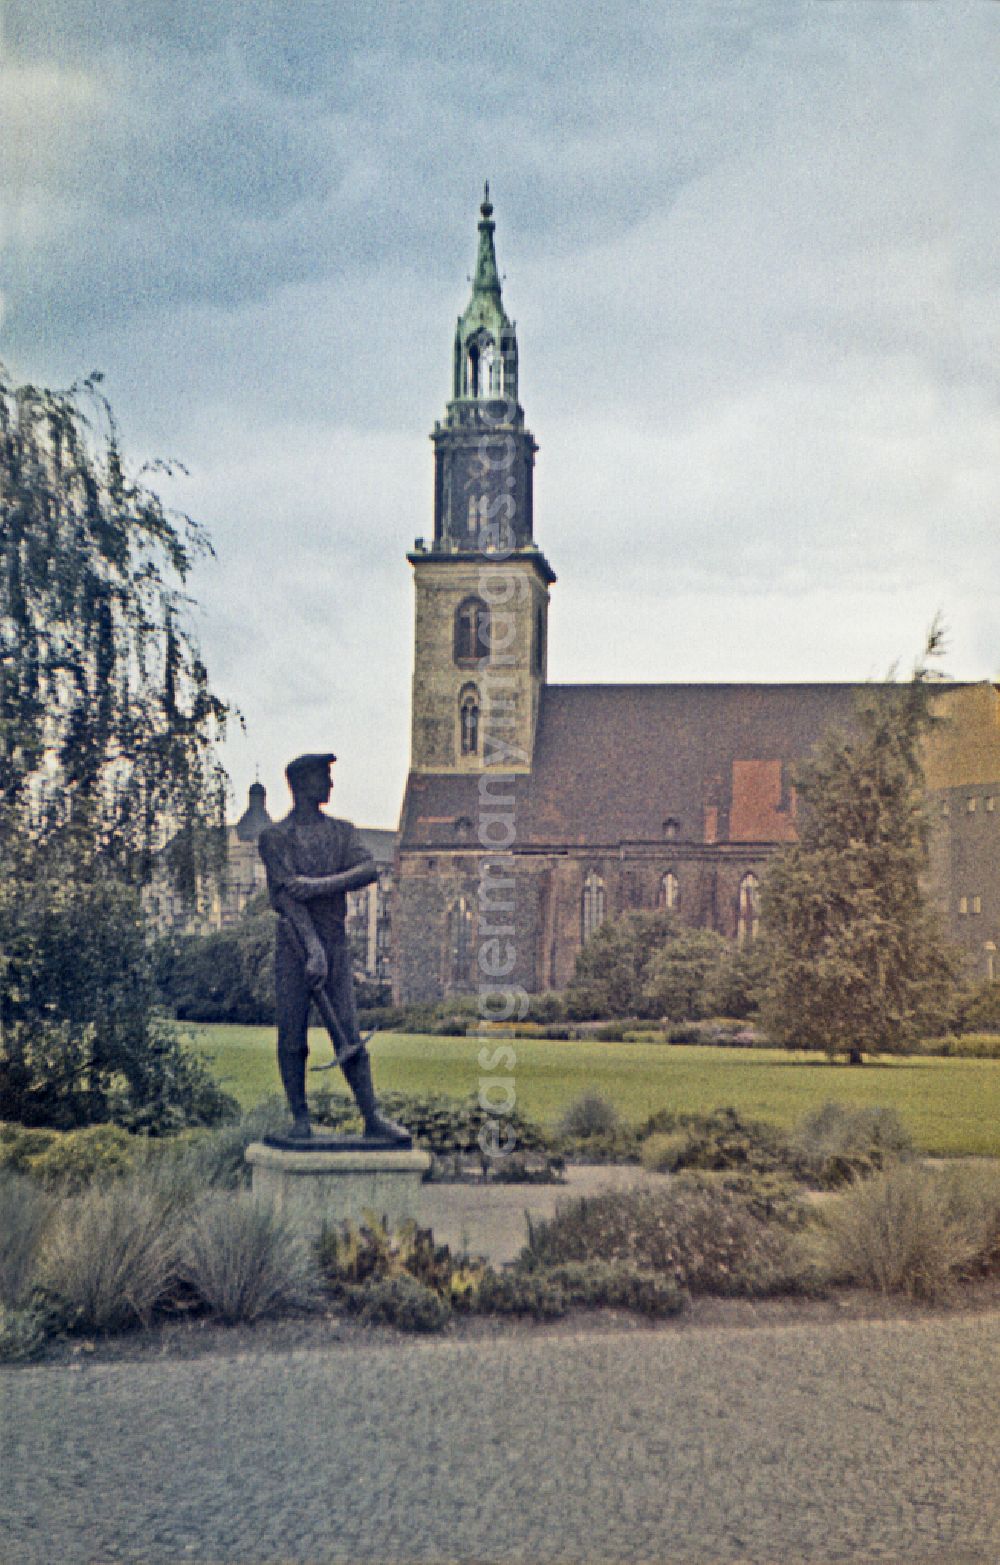 GDR photo archive: Berlin - Sculpture of a construction worker on Rathausstrasse in front of the bell tower of the sacred building of the church St. Marienkirche on Karl-Liebknecht-Strasse in the Mitte district of Berlin East Berlin on the territory of the former GDR, German Democratic Republic